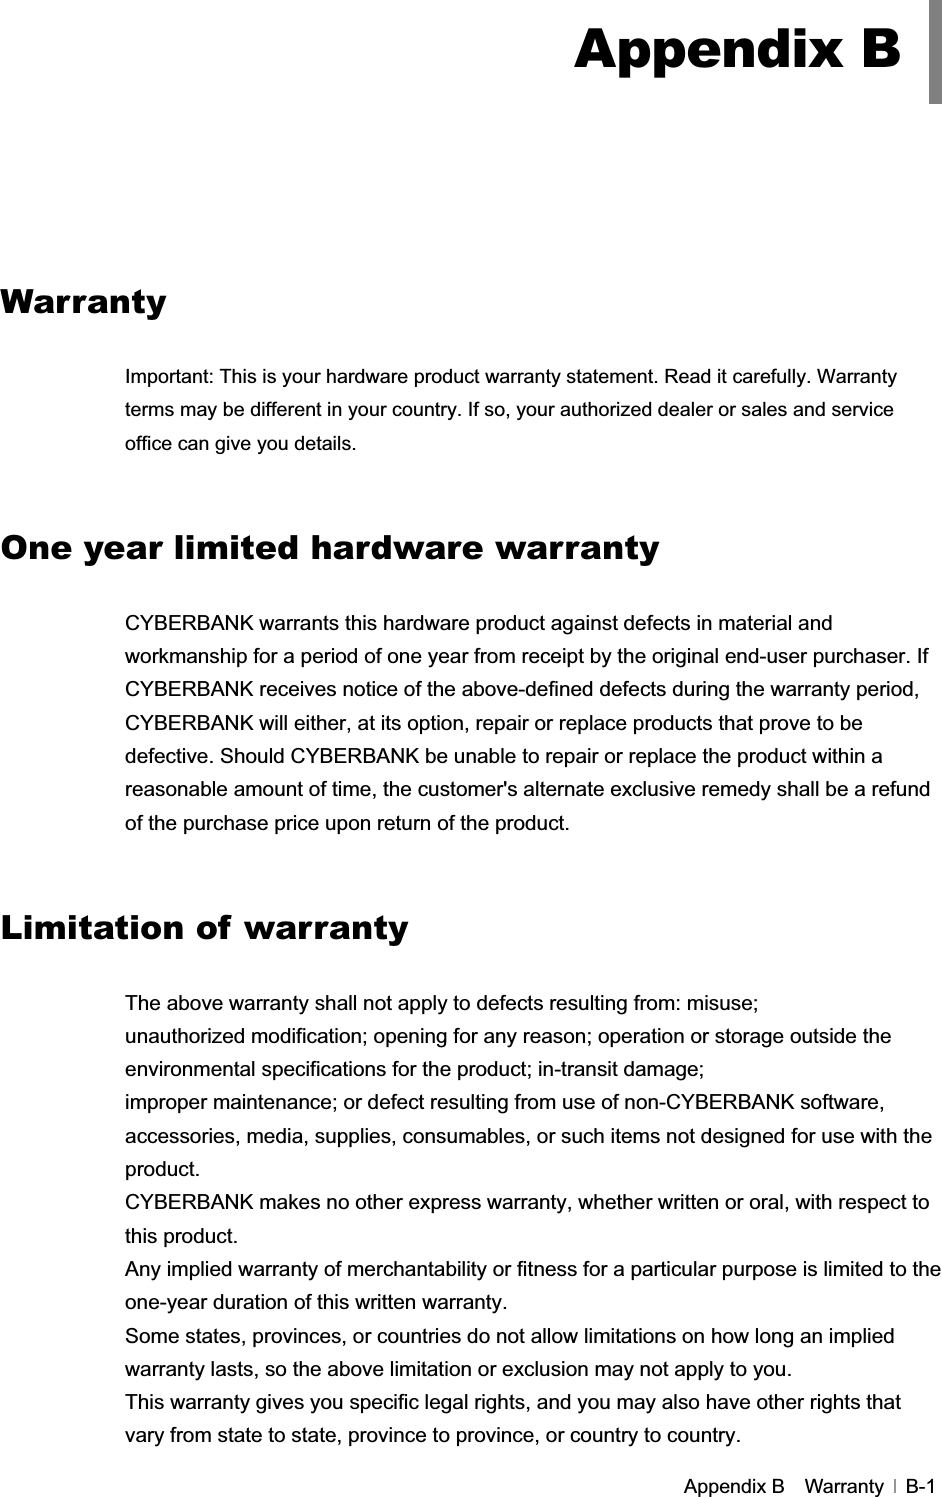 GAppendix B    Warranty   B-1GGGGGGGGGWarranty GImportant: This is your hardware product warranty statement. Read it carefully. Warranty terms may be different in your country. If so, your authorized dealer or sales and service office can give you details. One year limited hardware warranty CYBERBANK warrants this hardware product against defects in material and workmanship for a period of one year from receipt by the original end-user purchaser. If CYBERBANK receives notice of the above-defined defects during the warranty period, CYBERBANK will either, at its option, repair or replace products that prove to be defective. Should CYBERBANK be unable to repair or replace the product within a reasonable amount of time, the customer&apos;s alternate exclusive remedy shall be a refund of the purchase price upon return of the product. Limitation of warranty The above warranty shall not apply to defects resulting from: misuse; unauthorized modification; opening for any reason; operation or storage outside the environmental specifications for the product; in-transit damage; improper maintenance; or defect resulting from use of non-CYBERBANK software, accessories, media, supplies, consumables, or such items not designed for use with the product. CYBERBANK makes no other express warranty, whether written or oral, with respect to this product. Any implied warranty of merchantability or fitness for a particular purpose is limited to the one-year duration of this written warranty. Some states, provinces, or countries do not allow limitations on how long an implied warranty lasts, so the above limitation or exclusion may not apply to you. This warranty gives you specific legal rights, and you may also have other rights that vary from state to state, province to province, or country to country.   Appendix B